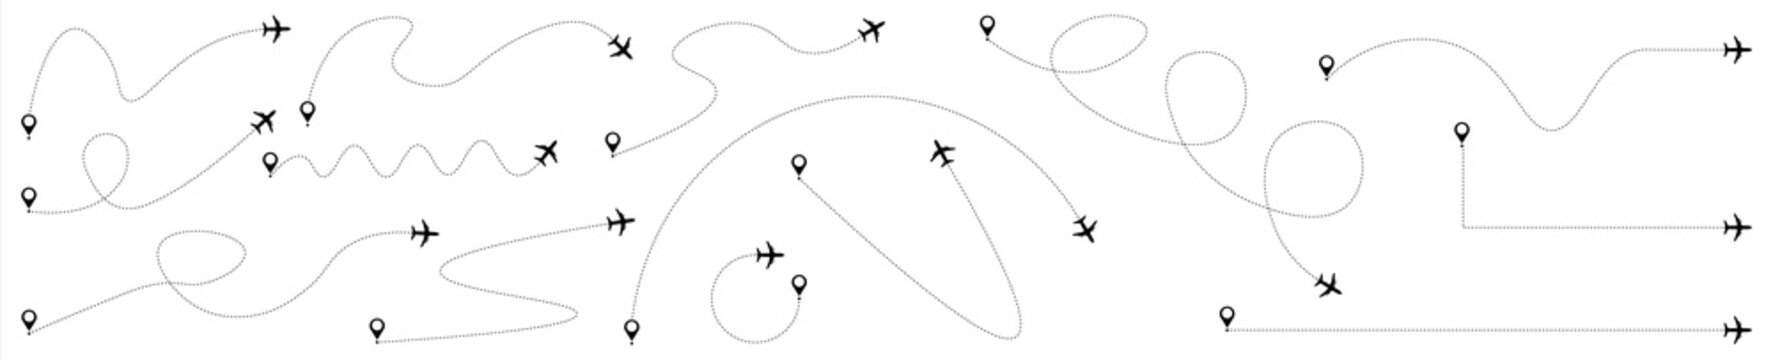 Airplane route. Plane line path icon isolated on background. Flight route with start point and dash line trace. Travel concept. Aircraft tracking, plans, map, location.